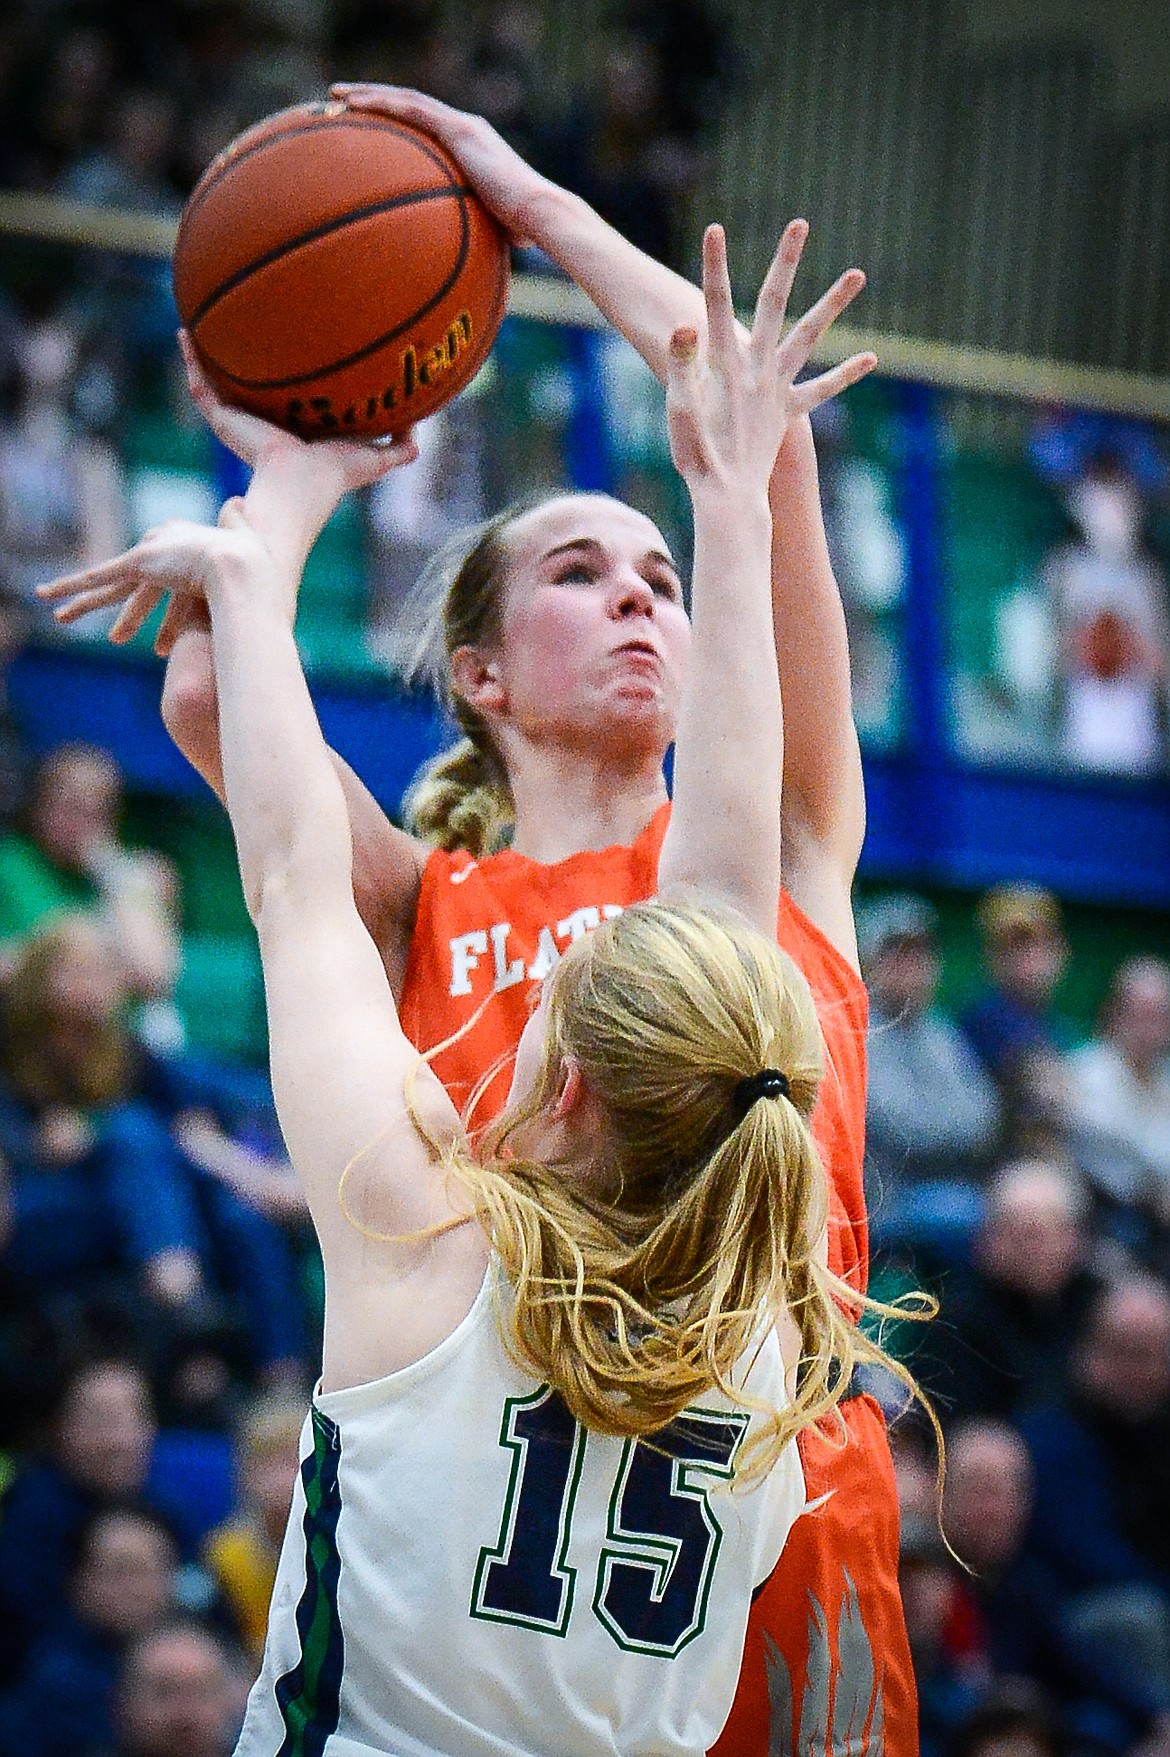 Flathead's Kennedy Moore (14) sinks a jumper over the defense of Glacier's Charlotte Osler (15) in the fourth quarter during crosstown basketball at Glacier High School on Friday, Jan. 20. (Casey Kreider/Daily Inter Lake)